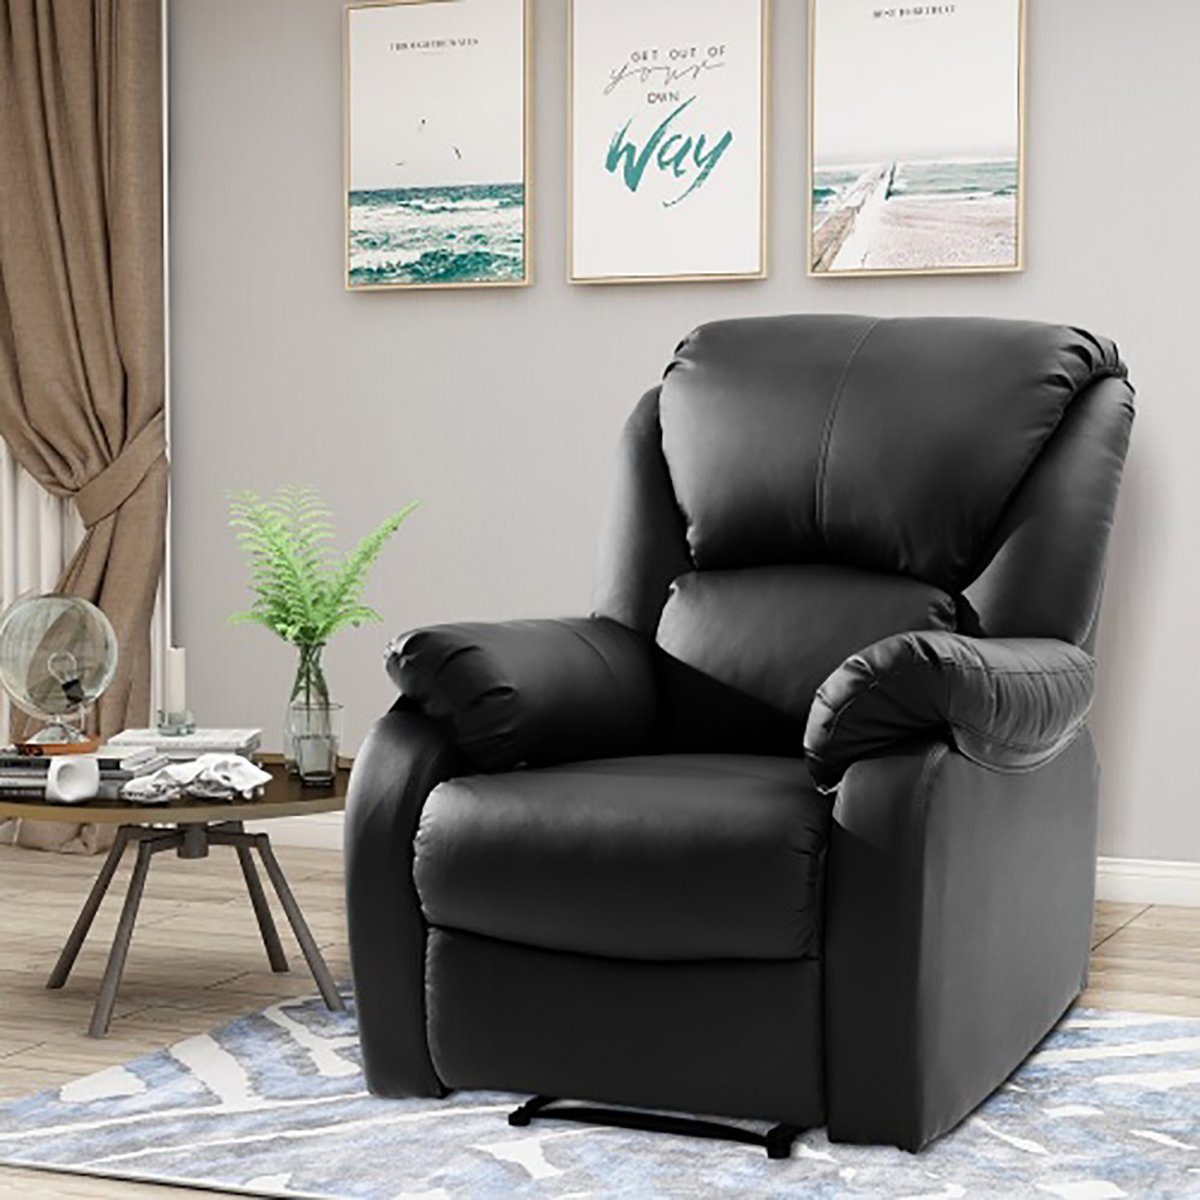 Leather Recliner DOTMALL for Recliner Sofa Sofa TV Home